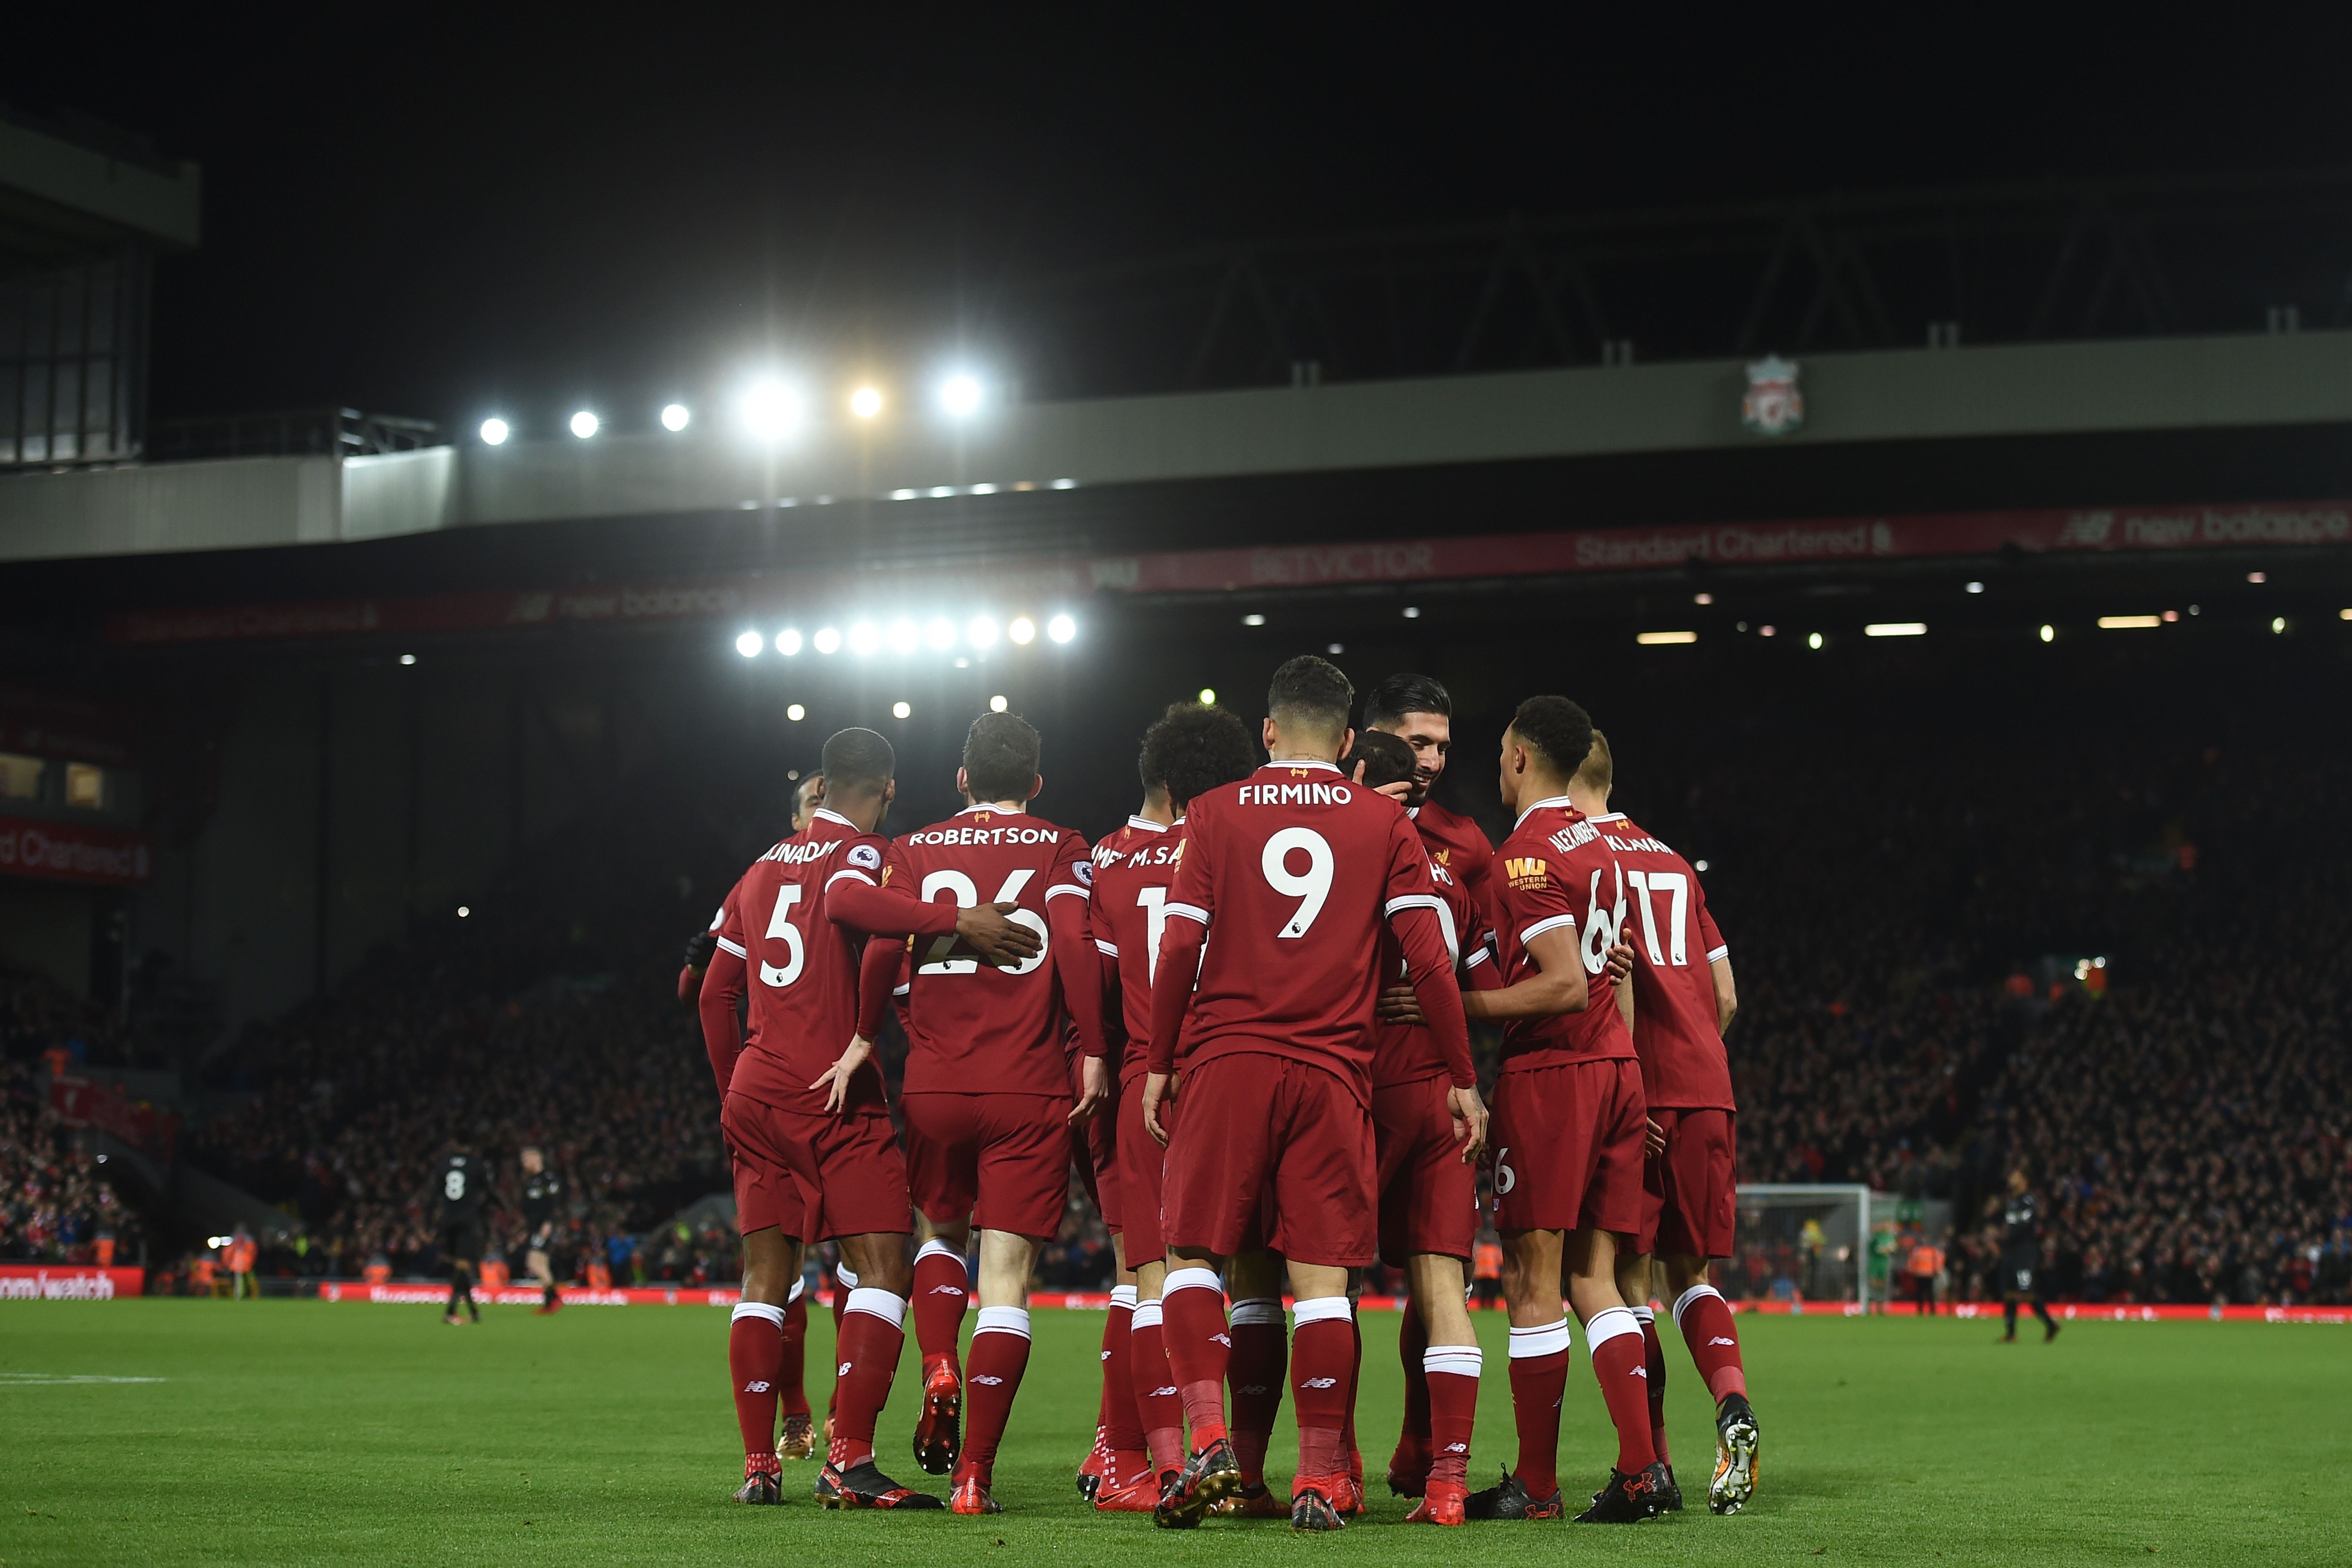 Liverpool players celebrate after their first goal scored by Liverpool's Brazilian midfielder Philippe Coutinho during the English Premier League football match between Liverpool and Swansea City at Anfield in Liverpool, north west England on December 26, 2017. / AFP PHOTO / PAUL ELLIS / RESTRICTED TO EDITORIAL USE. No use with unauthorized audio, video, data, fixture lists, club/league logos or 'live' services. Online in-match use limited to 75 images, no video emulation. No use in betting, games or single club/league/player publications.  /         (Photo credit should read PAUL ELLIS/AFP/Getty Images)